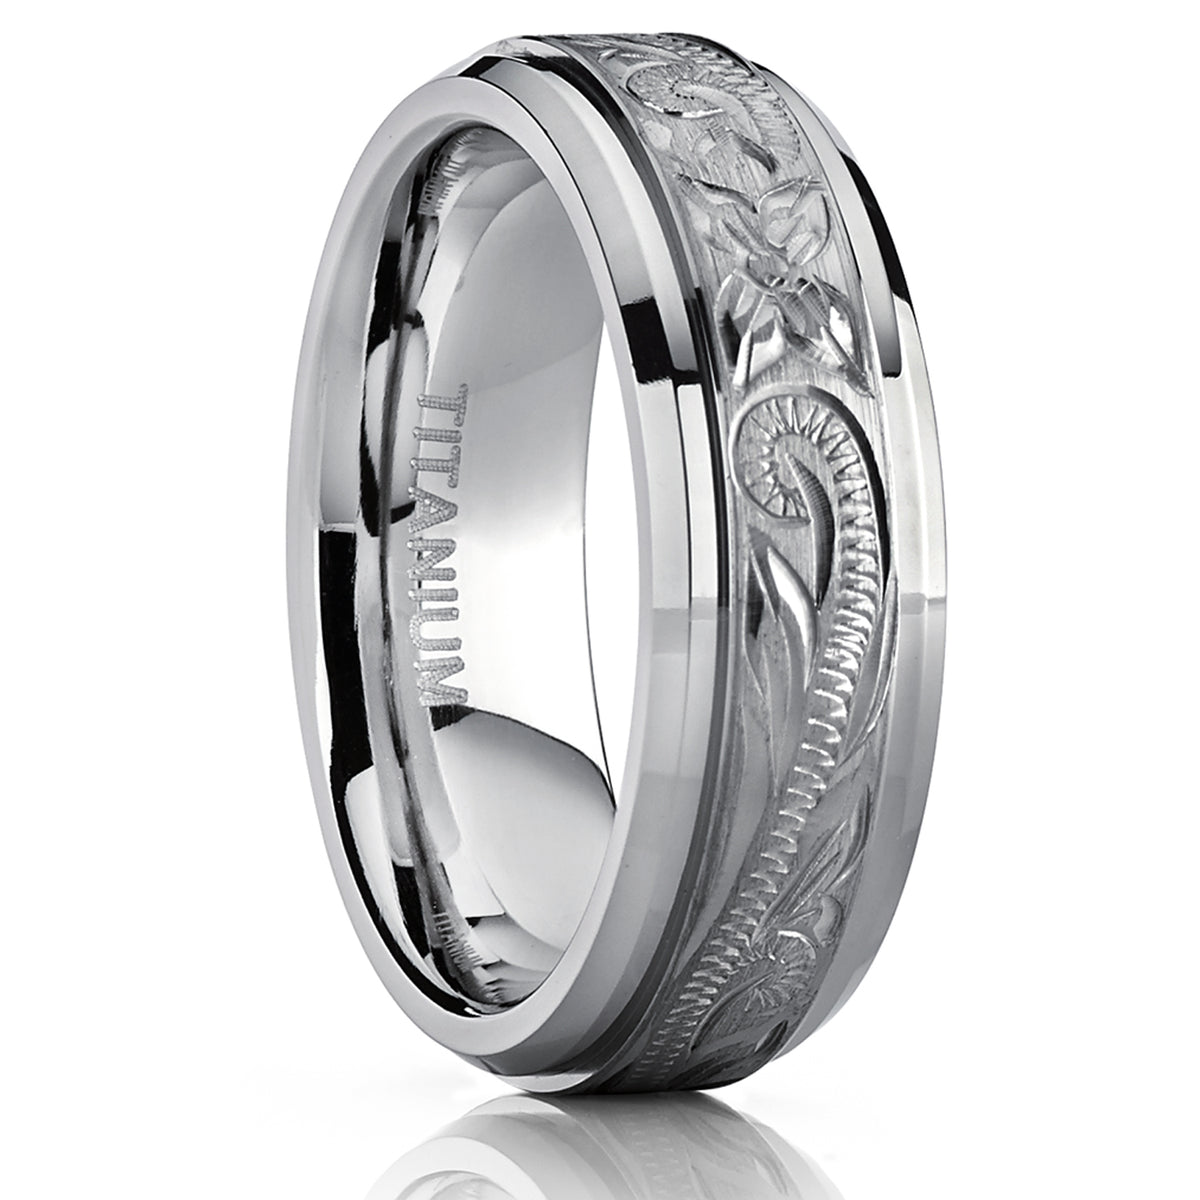 Mens Hand Engraved Titanium Wedding Ring Band Comfort Fit 7mm Metal Masters Co 